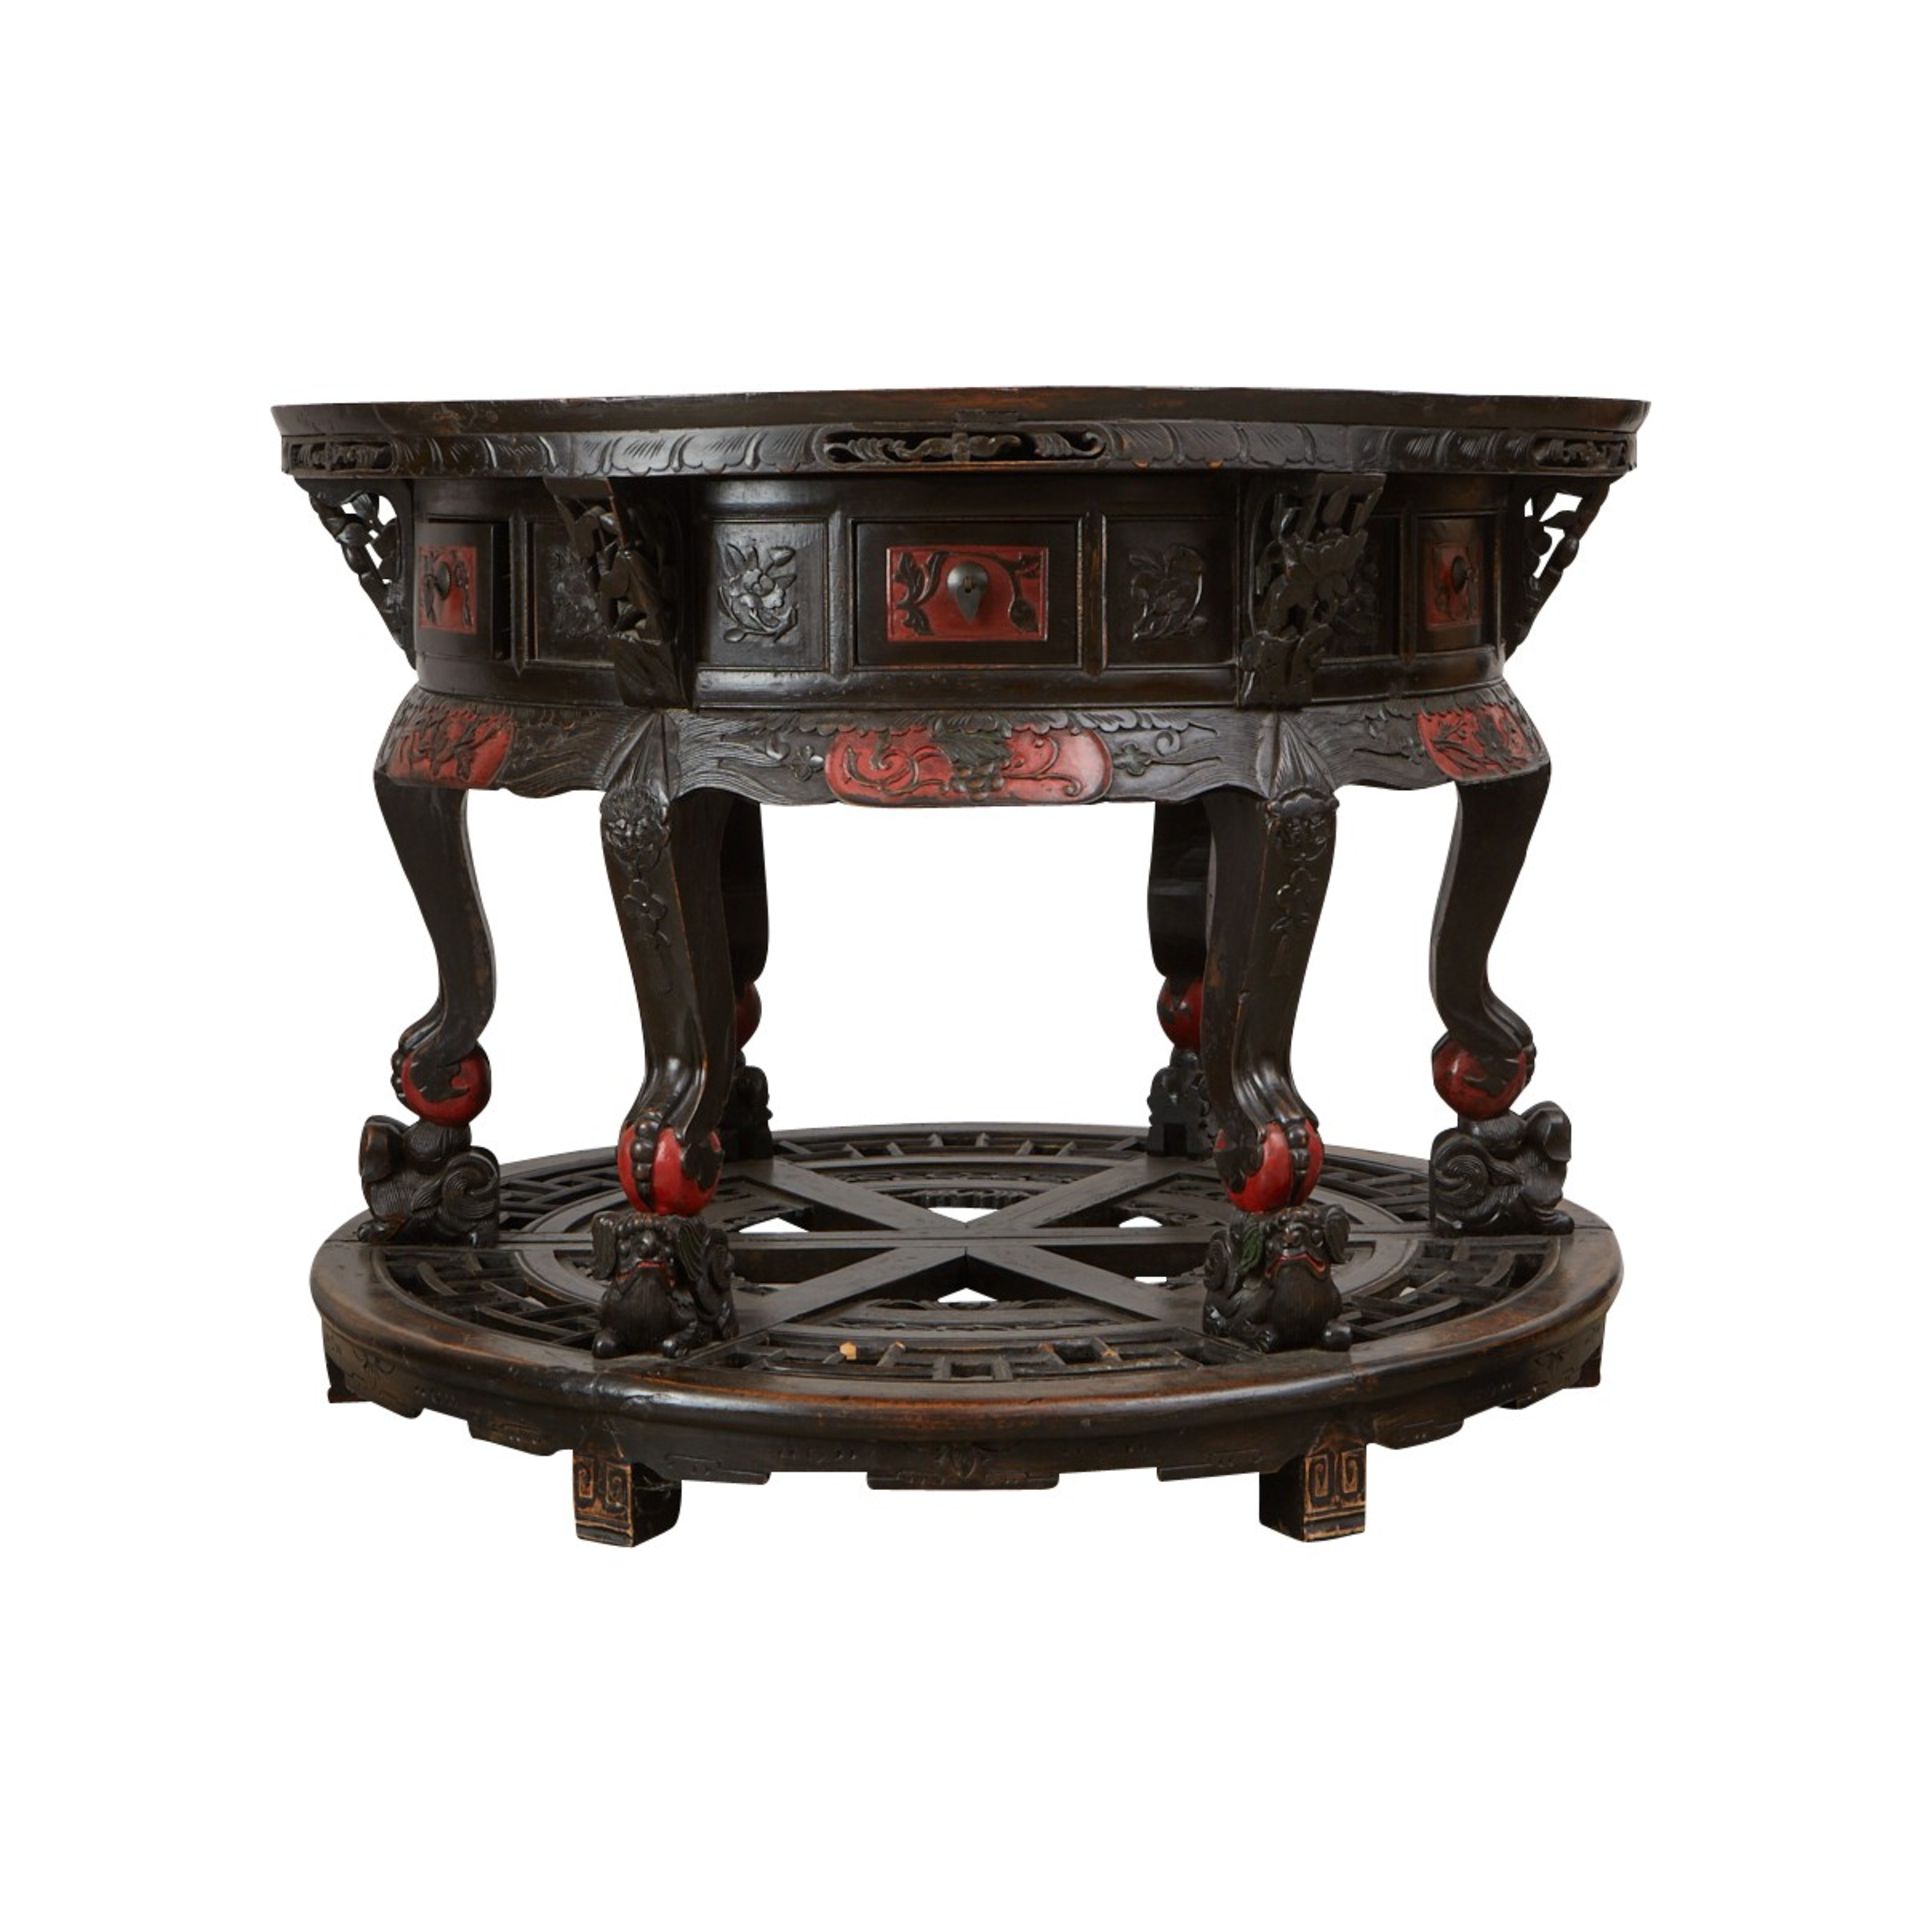 Chinese Round Carved Wood Table w/ Drawers 19th c. - Image 5 of 11